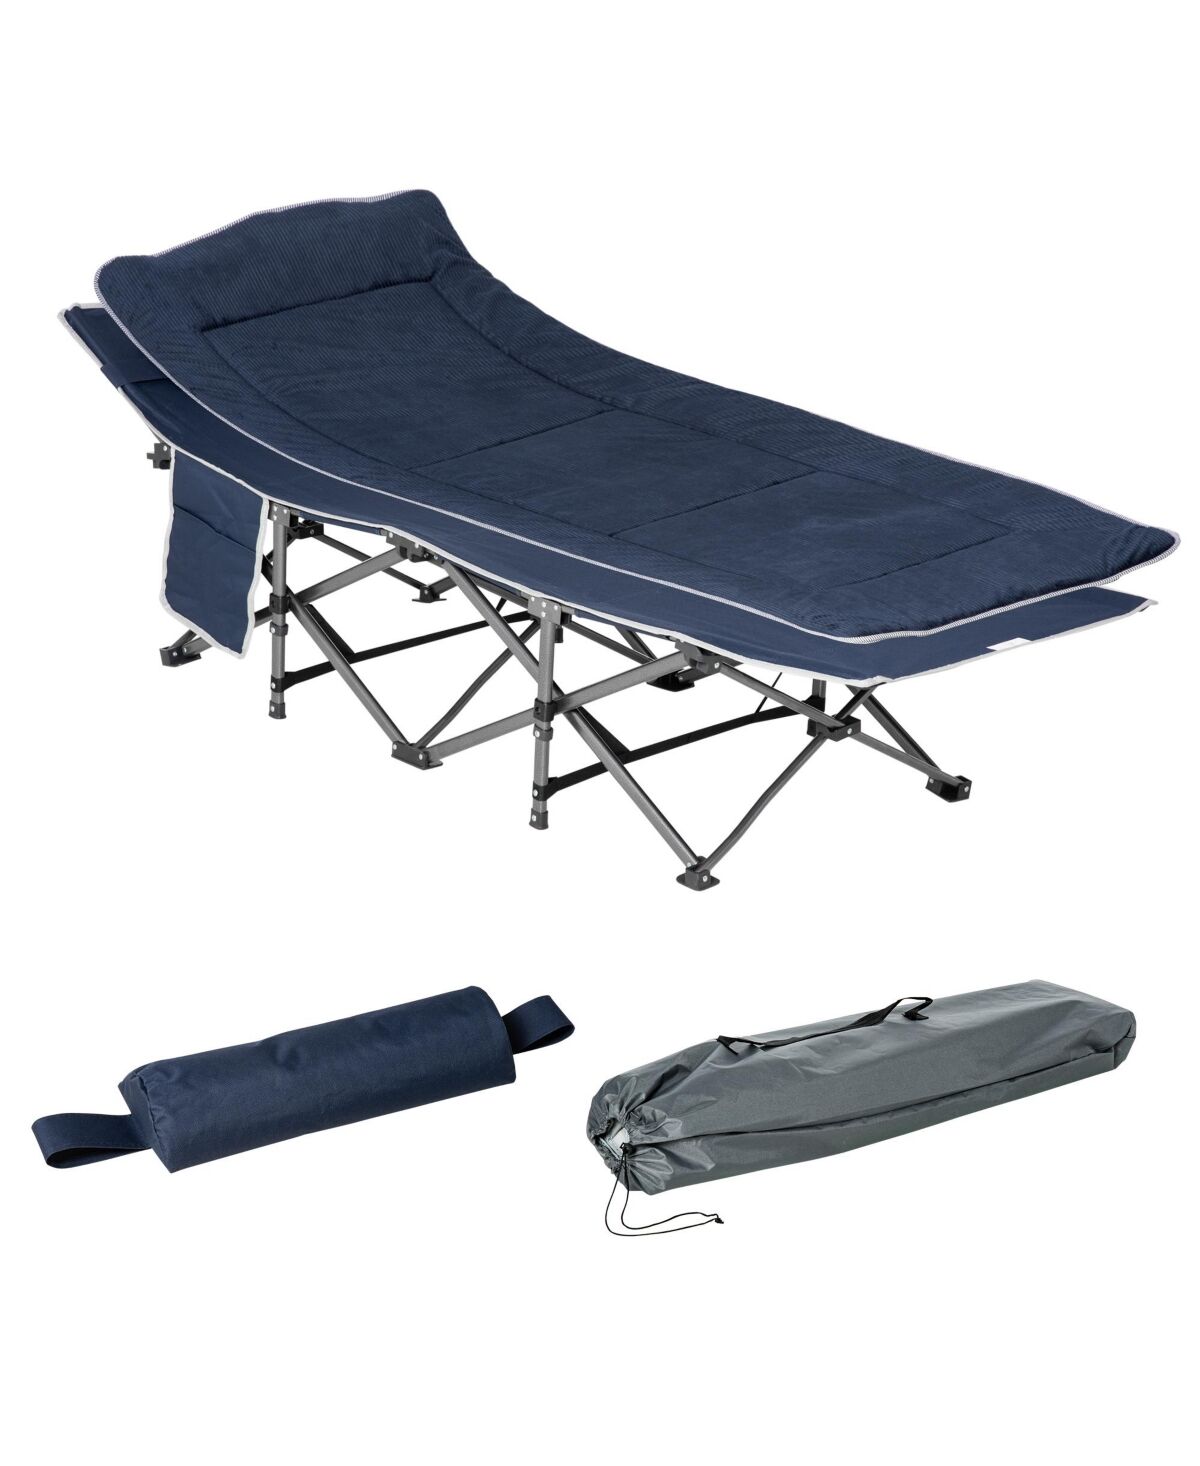 Outsunny Folding Camping Cot Adults, Double Layer Heavy Duty Sleeping Cot with Carry Bag, Headrest, Reversible Mattress, Portable Outdoor Lightweight